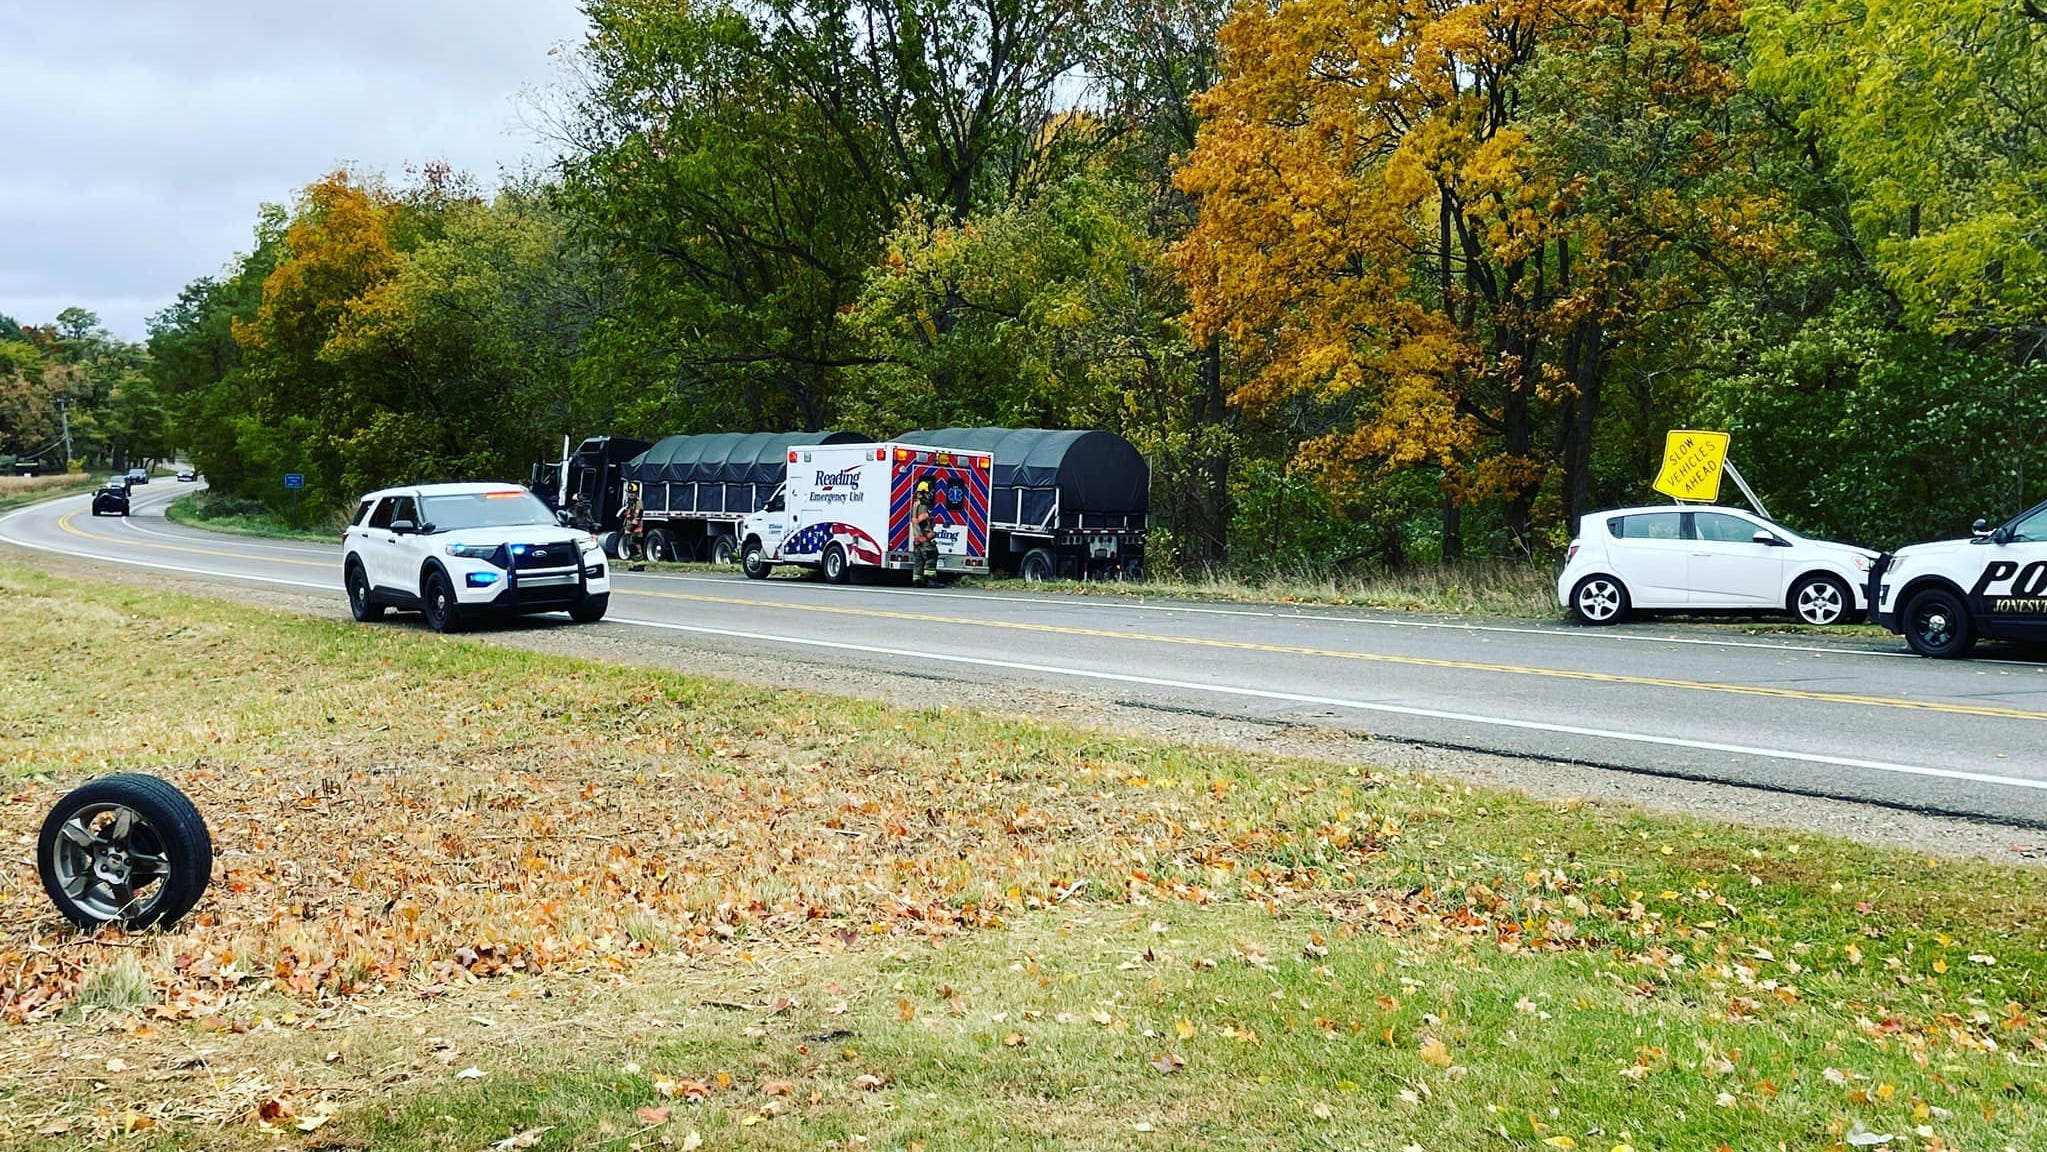   
																Hillsdale man cited for improper lane use after crash with semi Monday 
															 